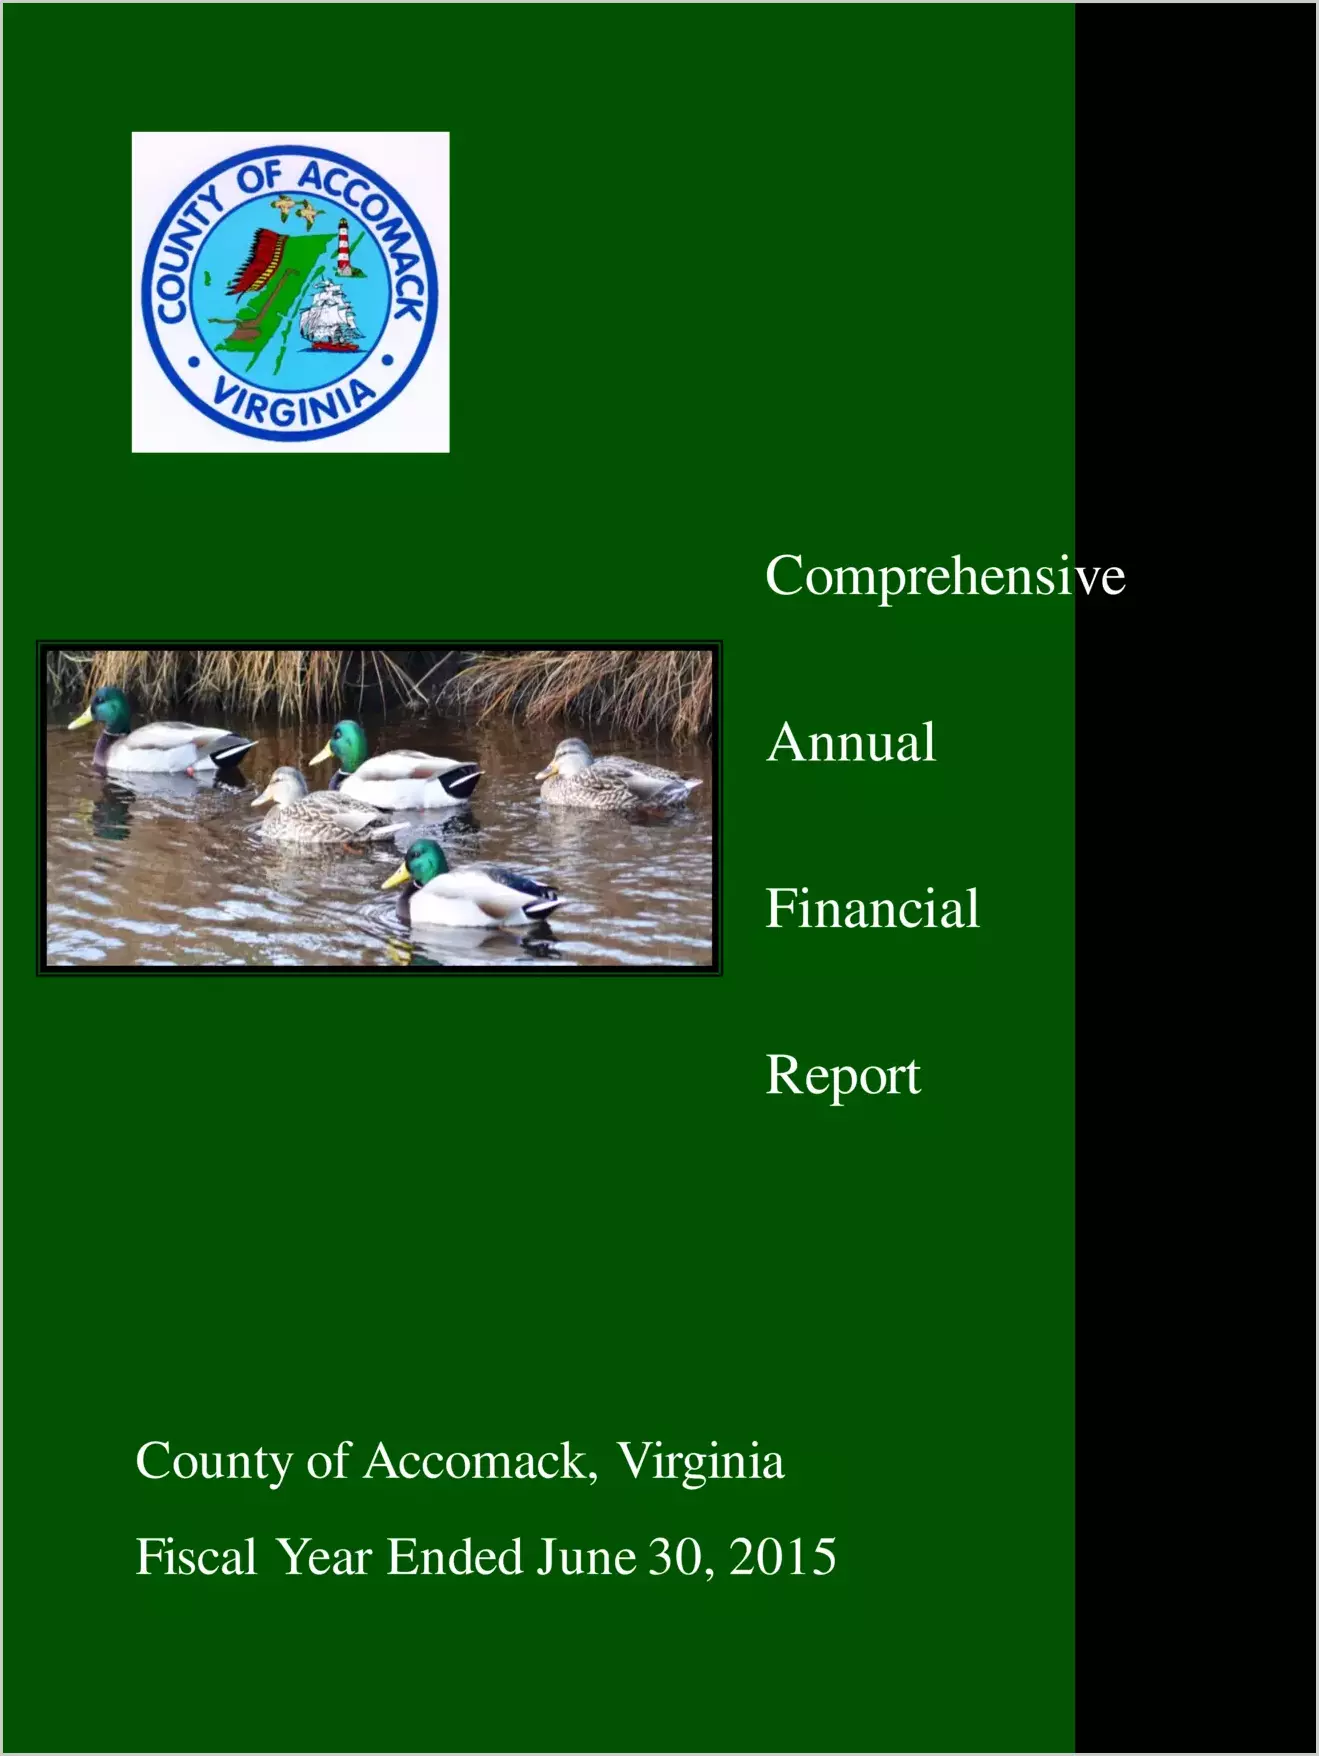 2015 Annual Financial Report for County of Accomack